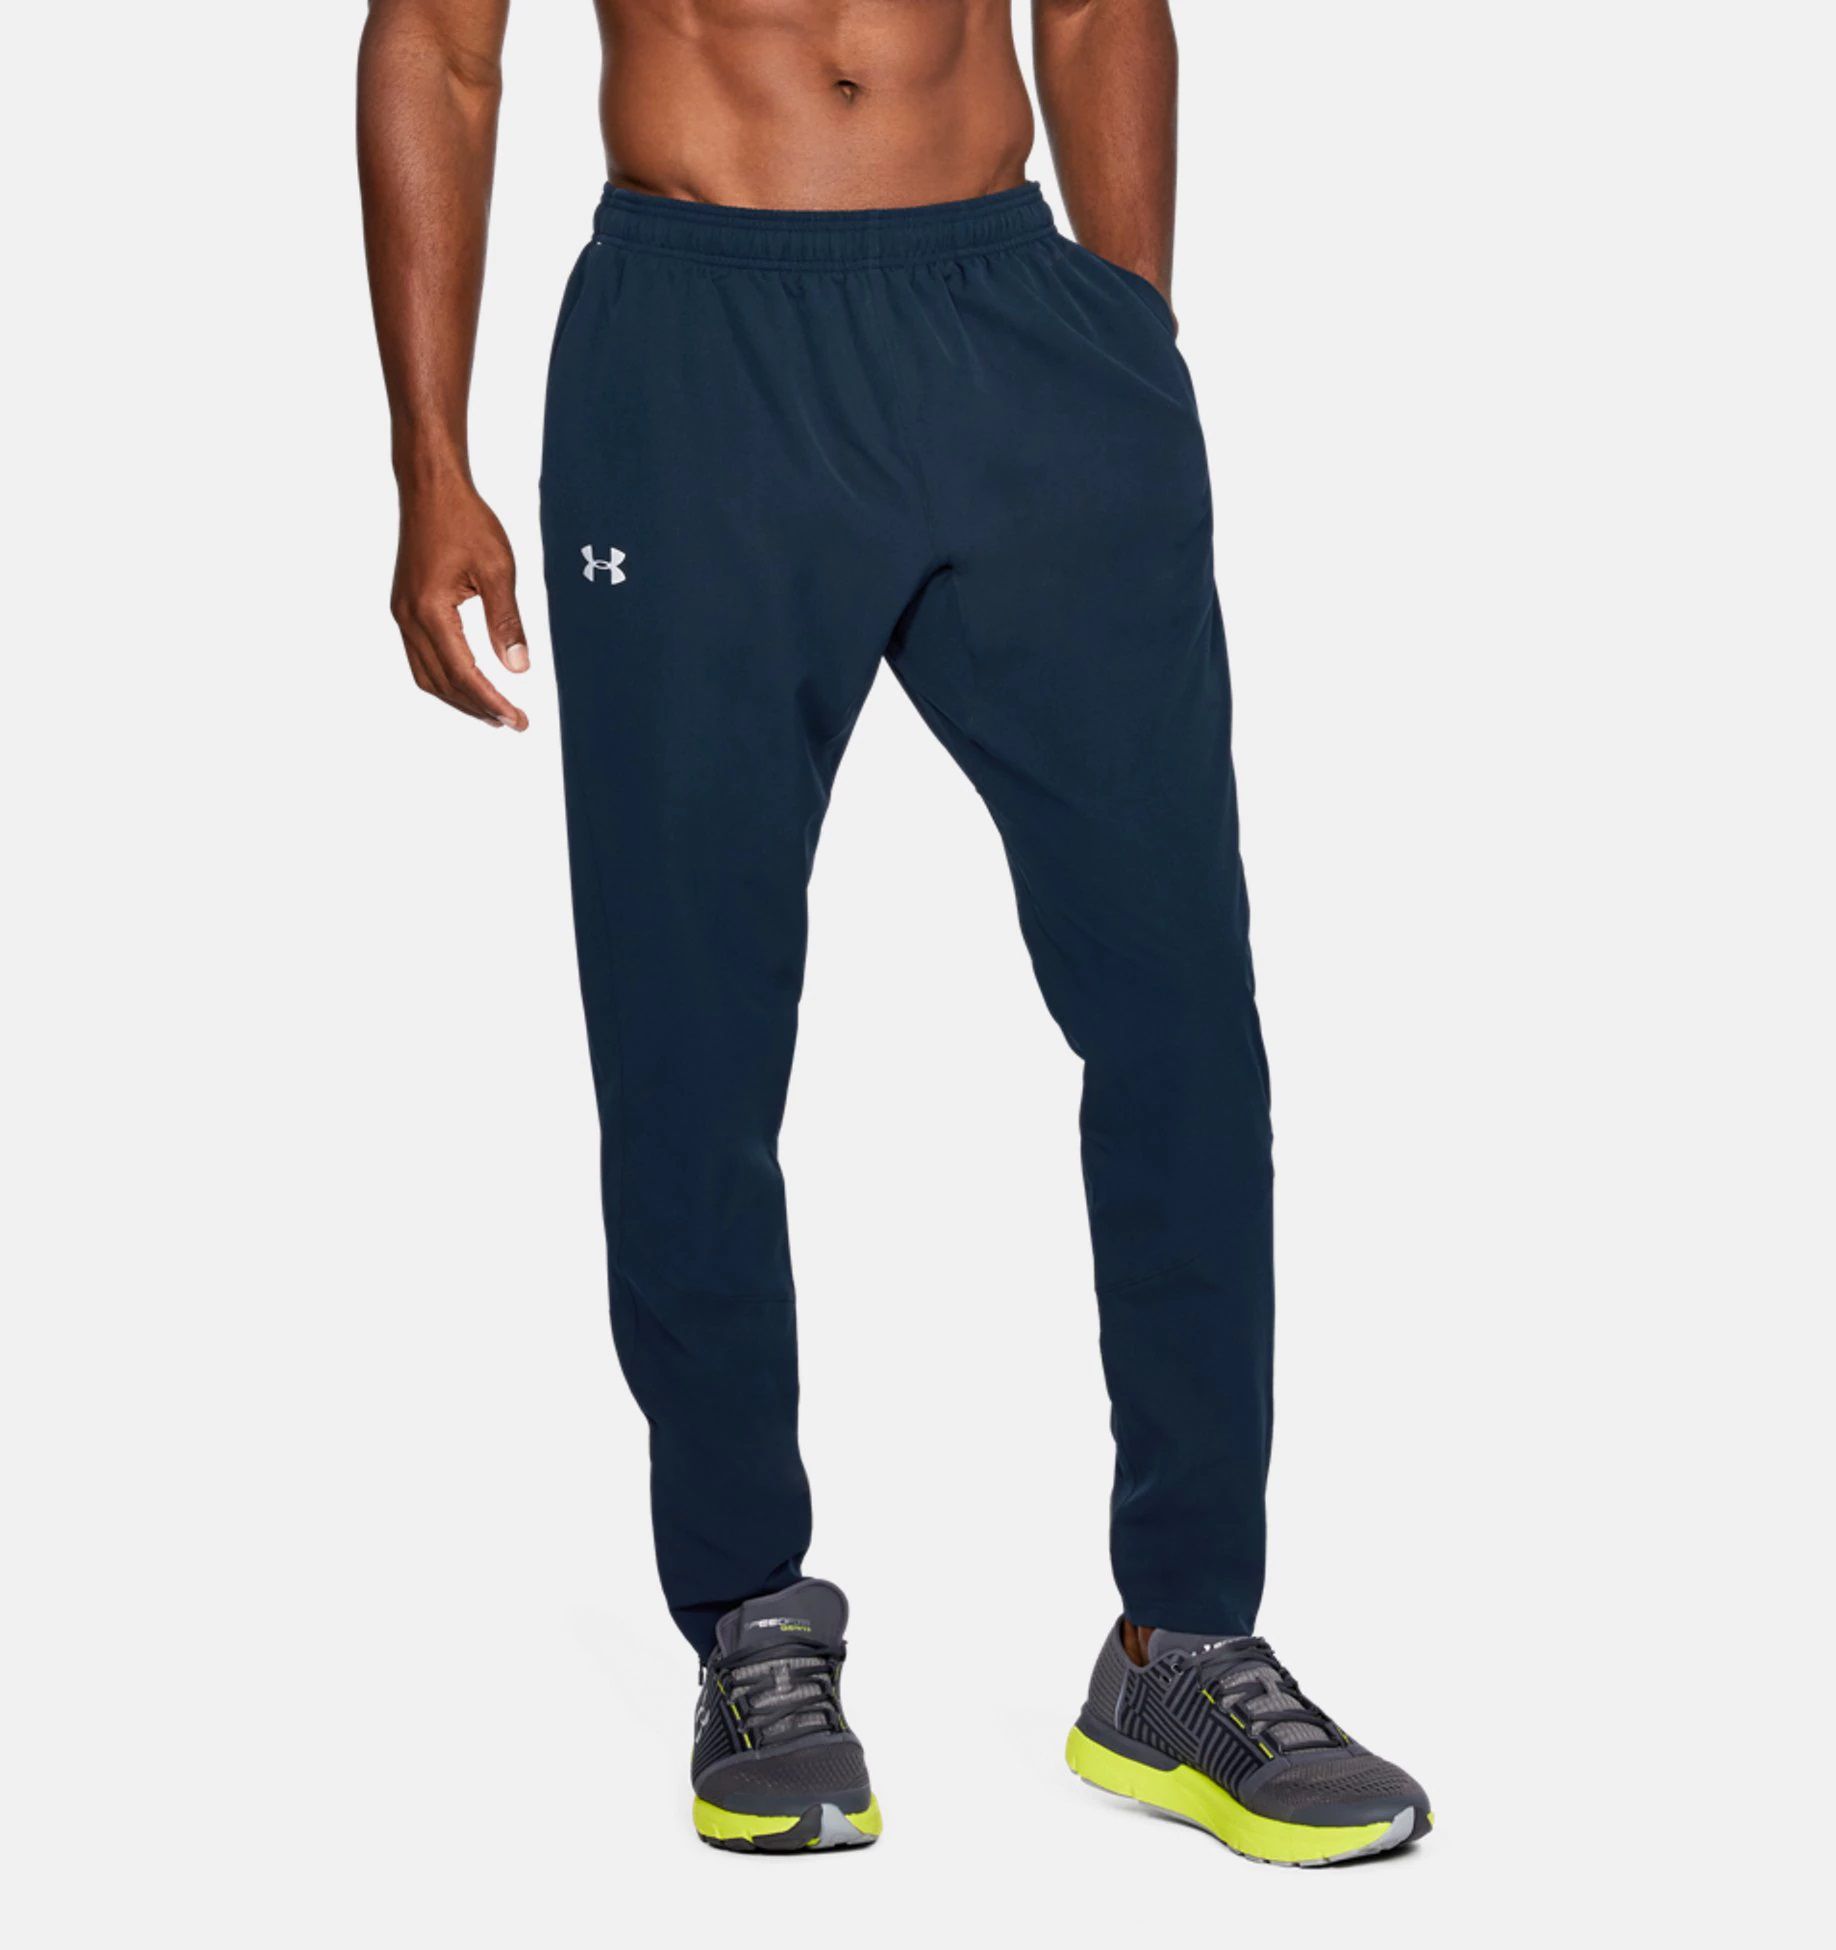 Under Armour Men's Track Pants For Running / Gym wear / Active Wear ...